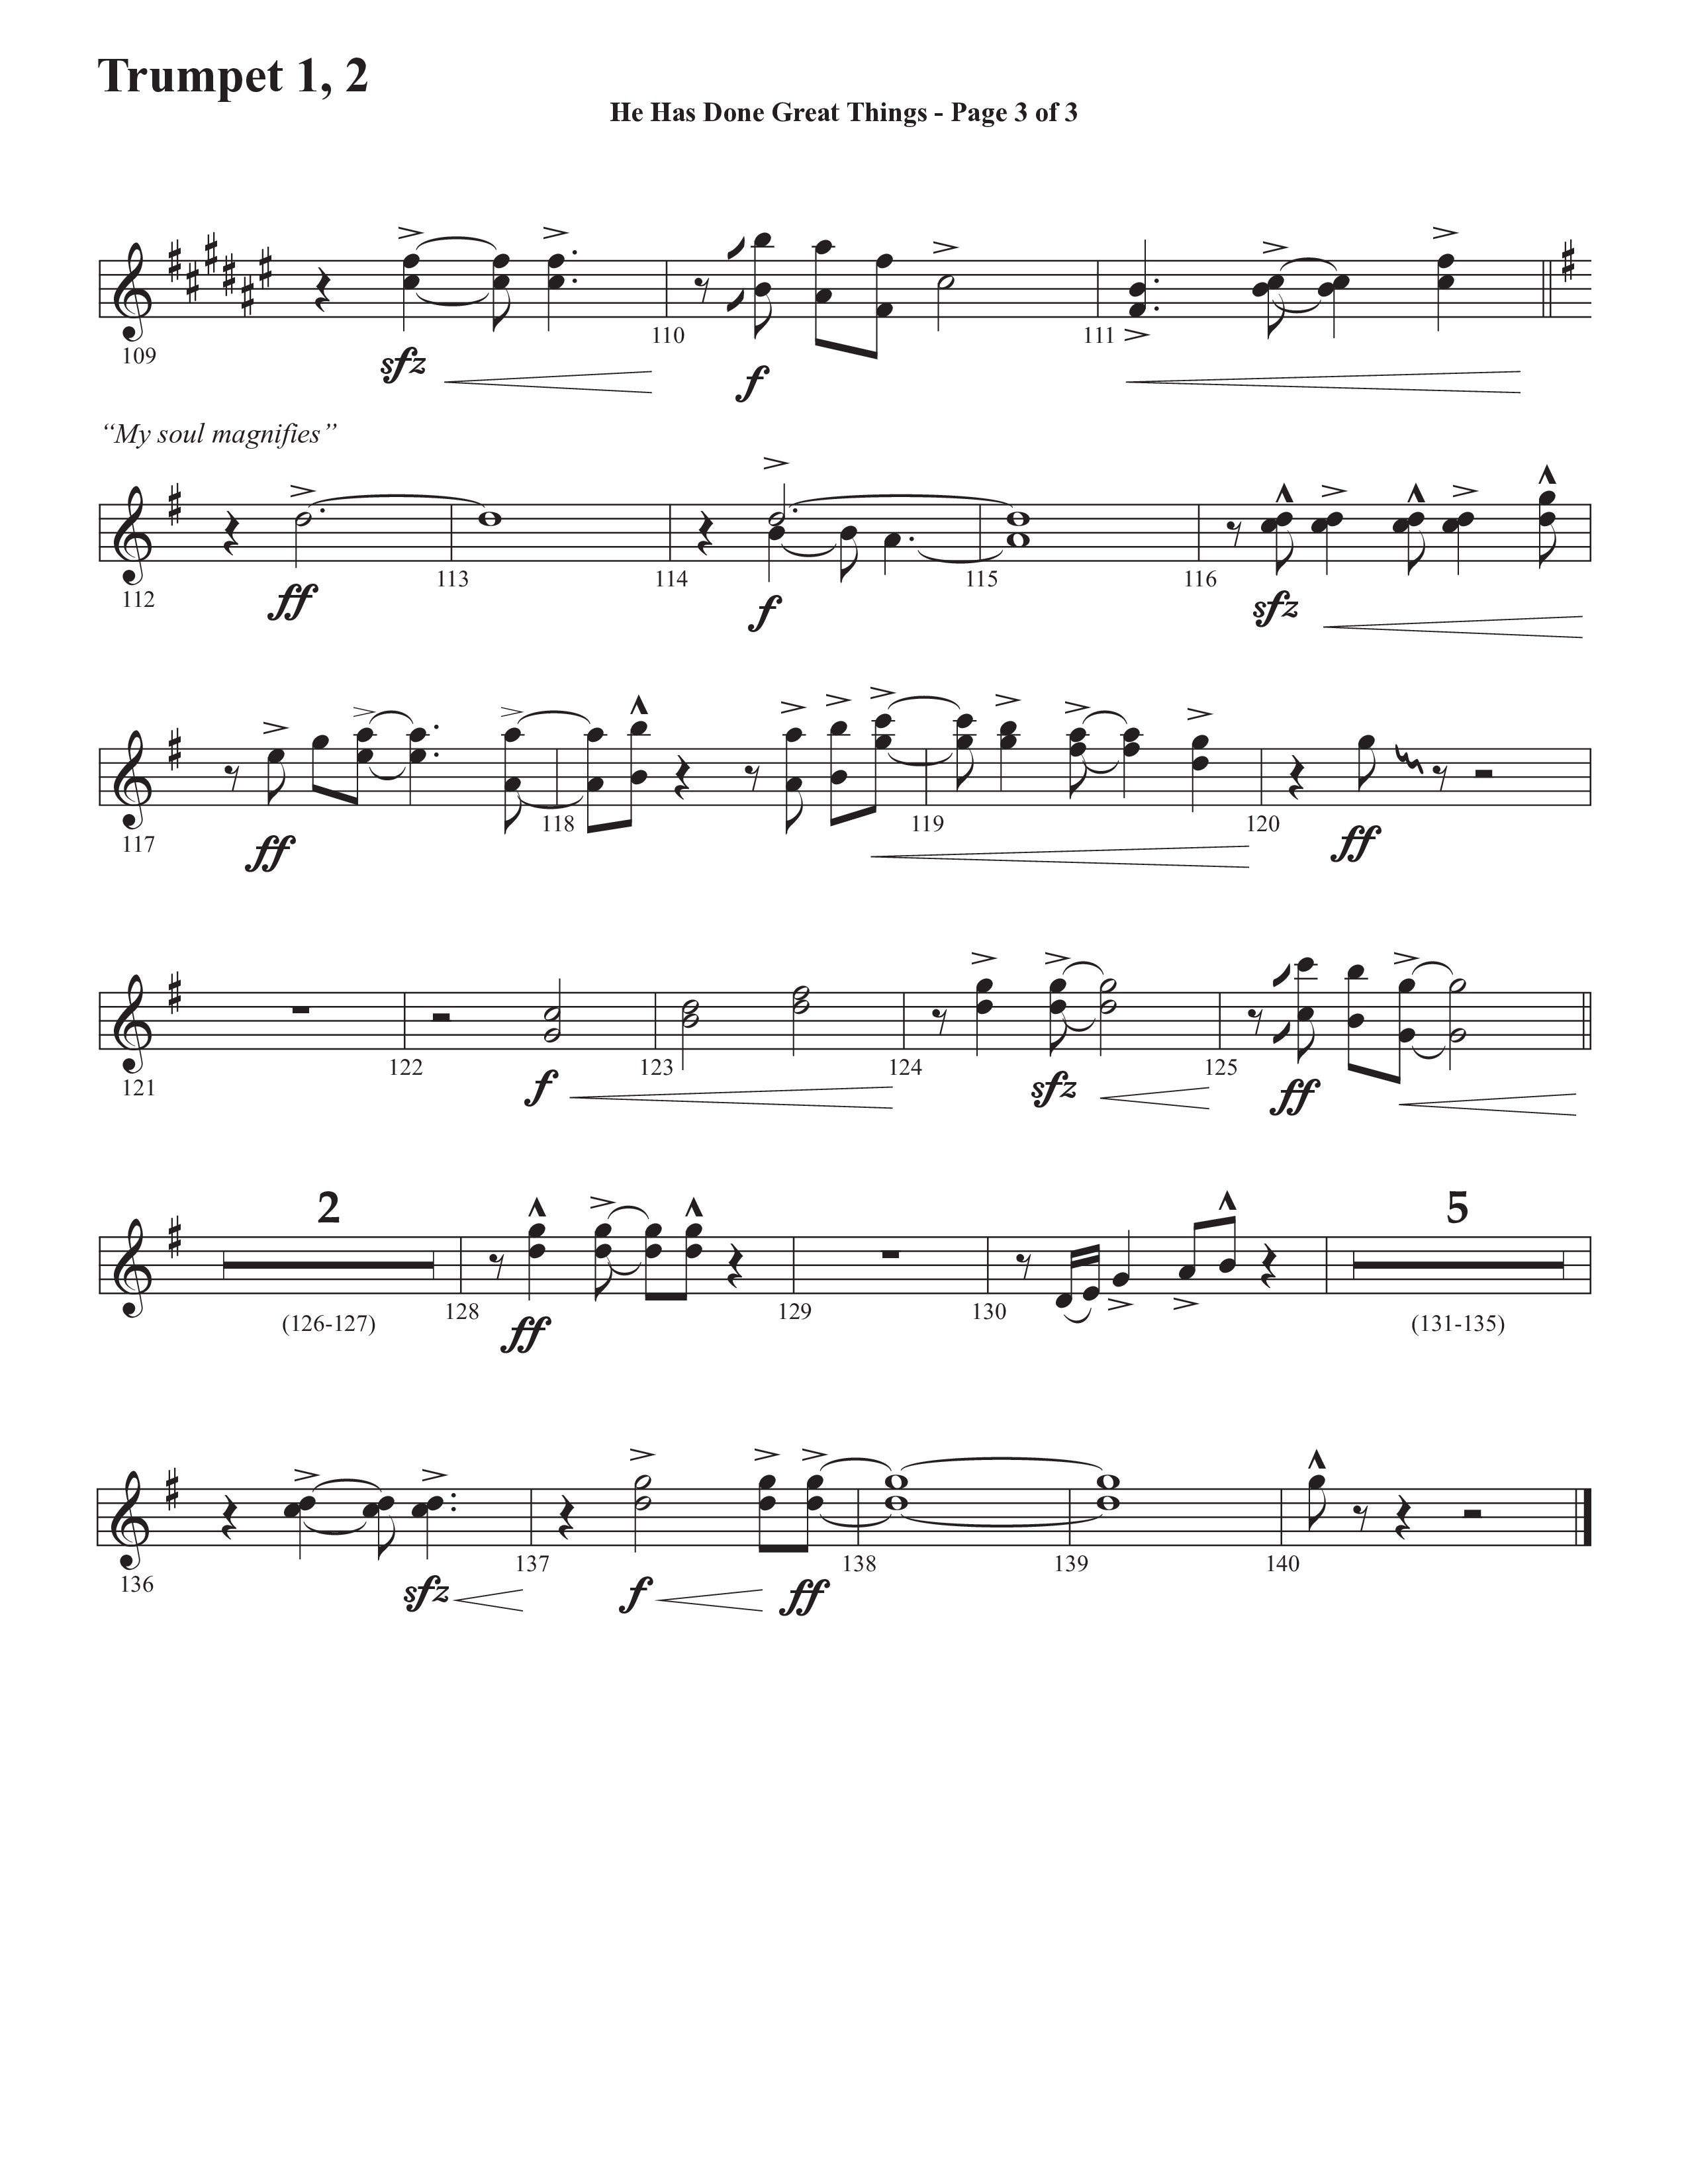 He Has Done Great Things (The Magnificat) (Choral Anthem SATB) Trumpet 1,2 (Semsen Music / Arr. John Bolin / Orch. Cliff Duren)